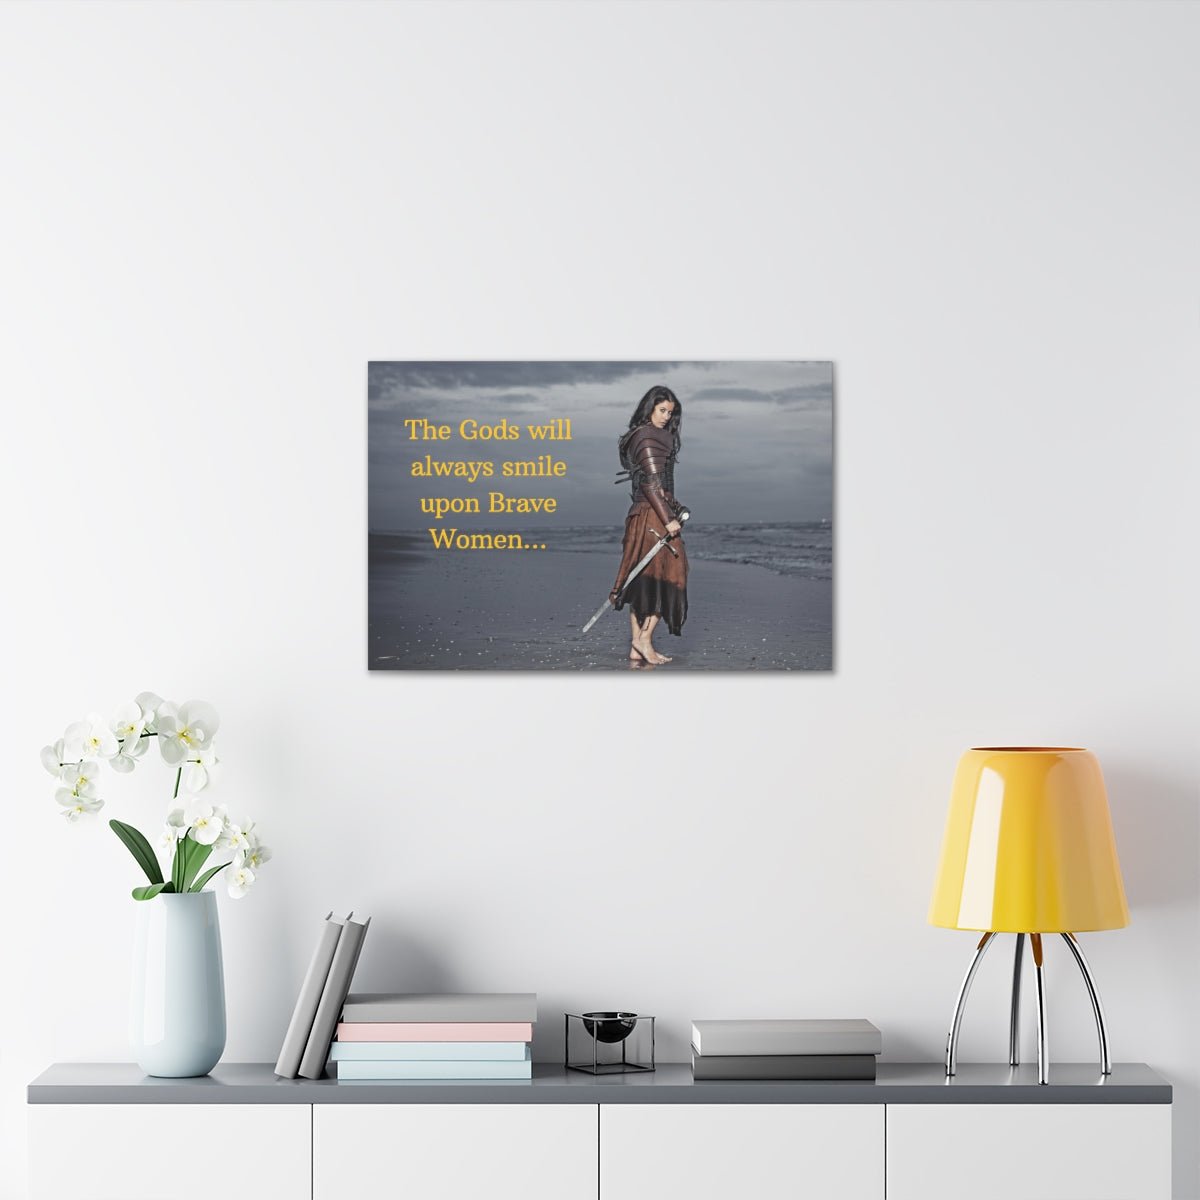 Viking Art on Canvas - &quot;The Gods will always smile upon Brave Women&quot;